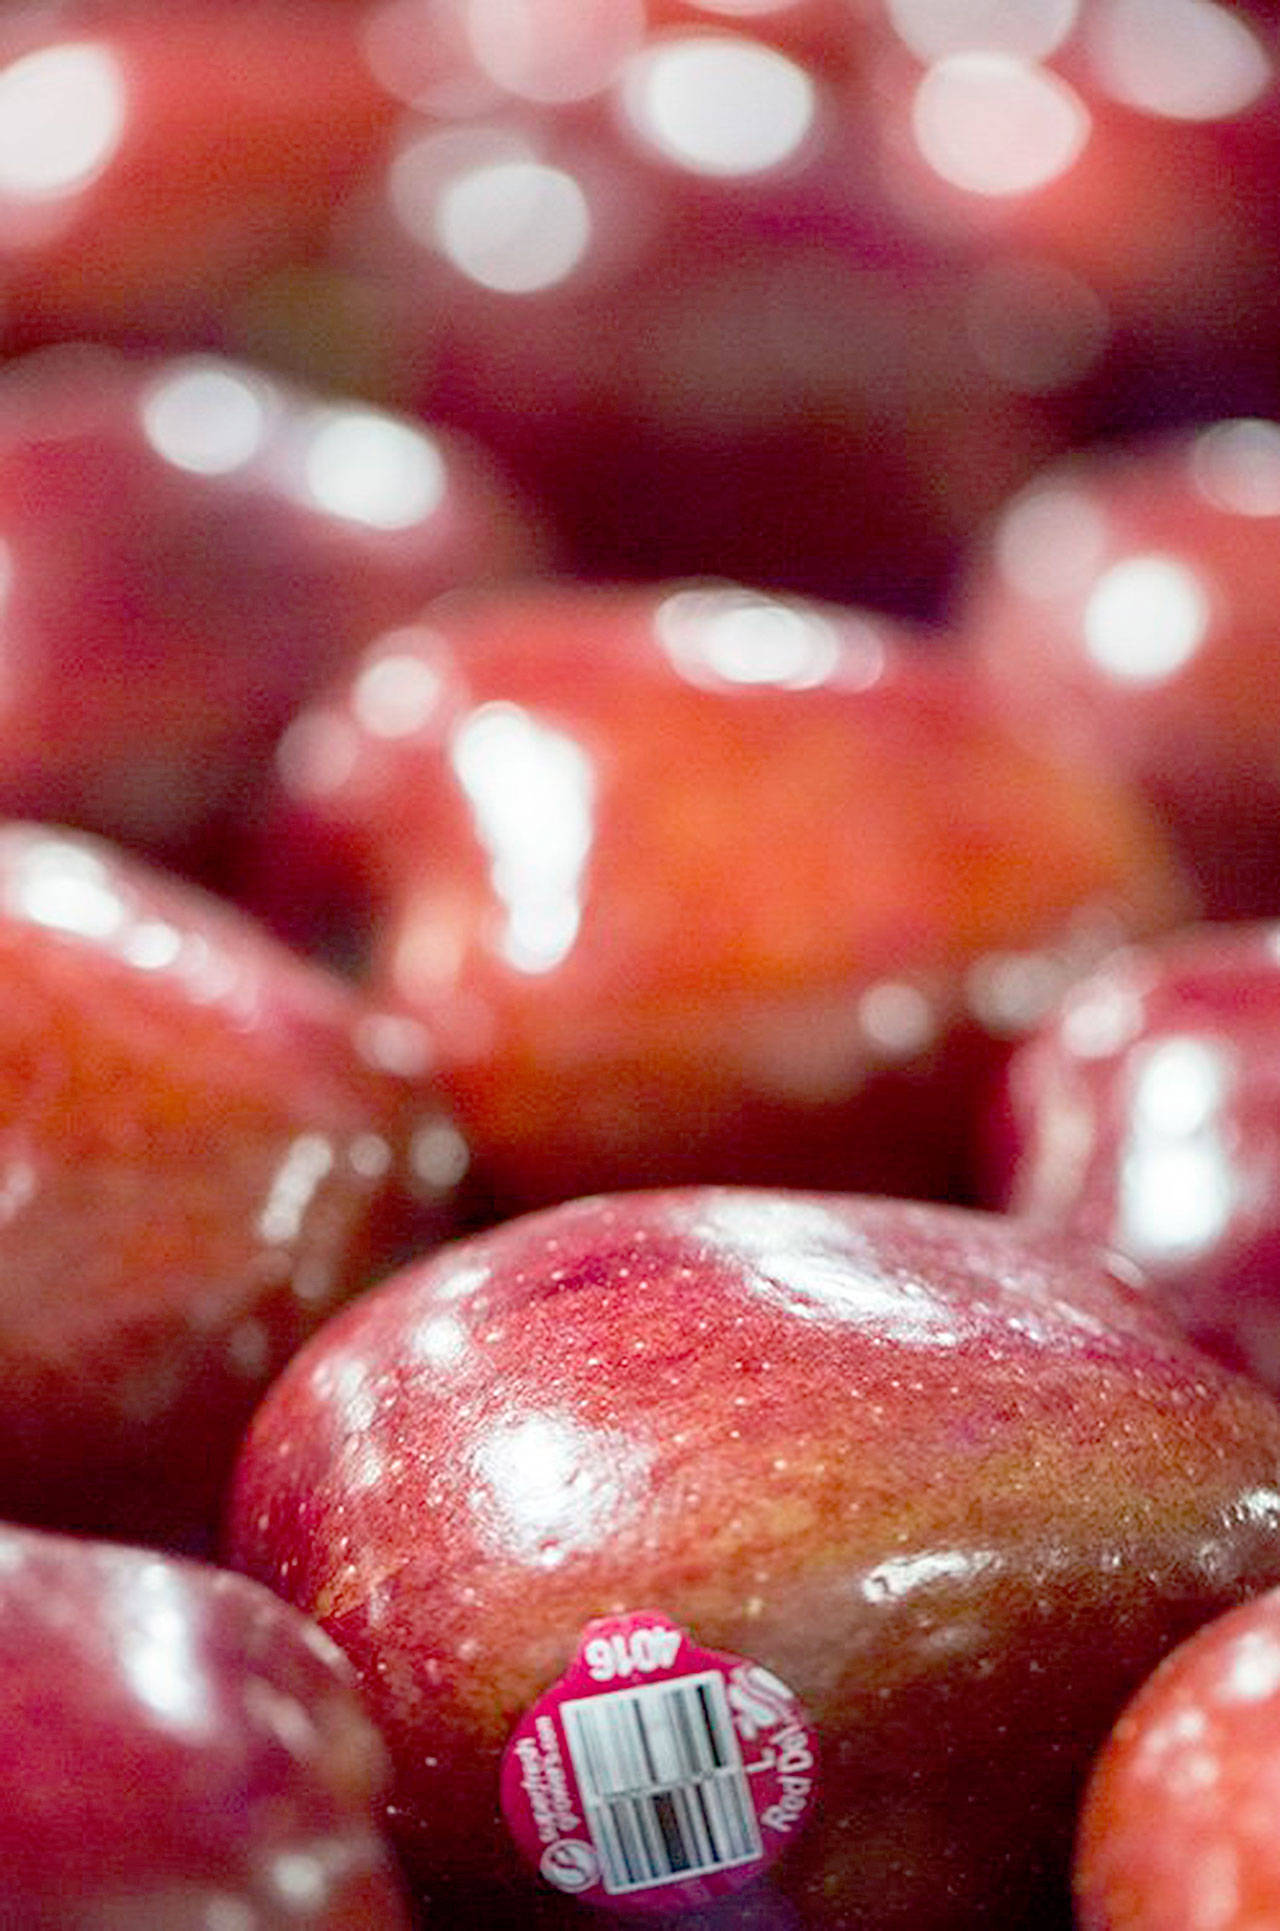 Red Delicious: An eight-decade run as top apple is about to end